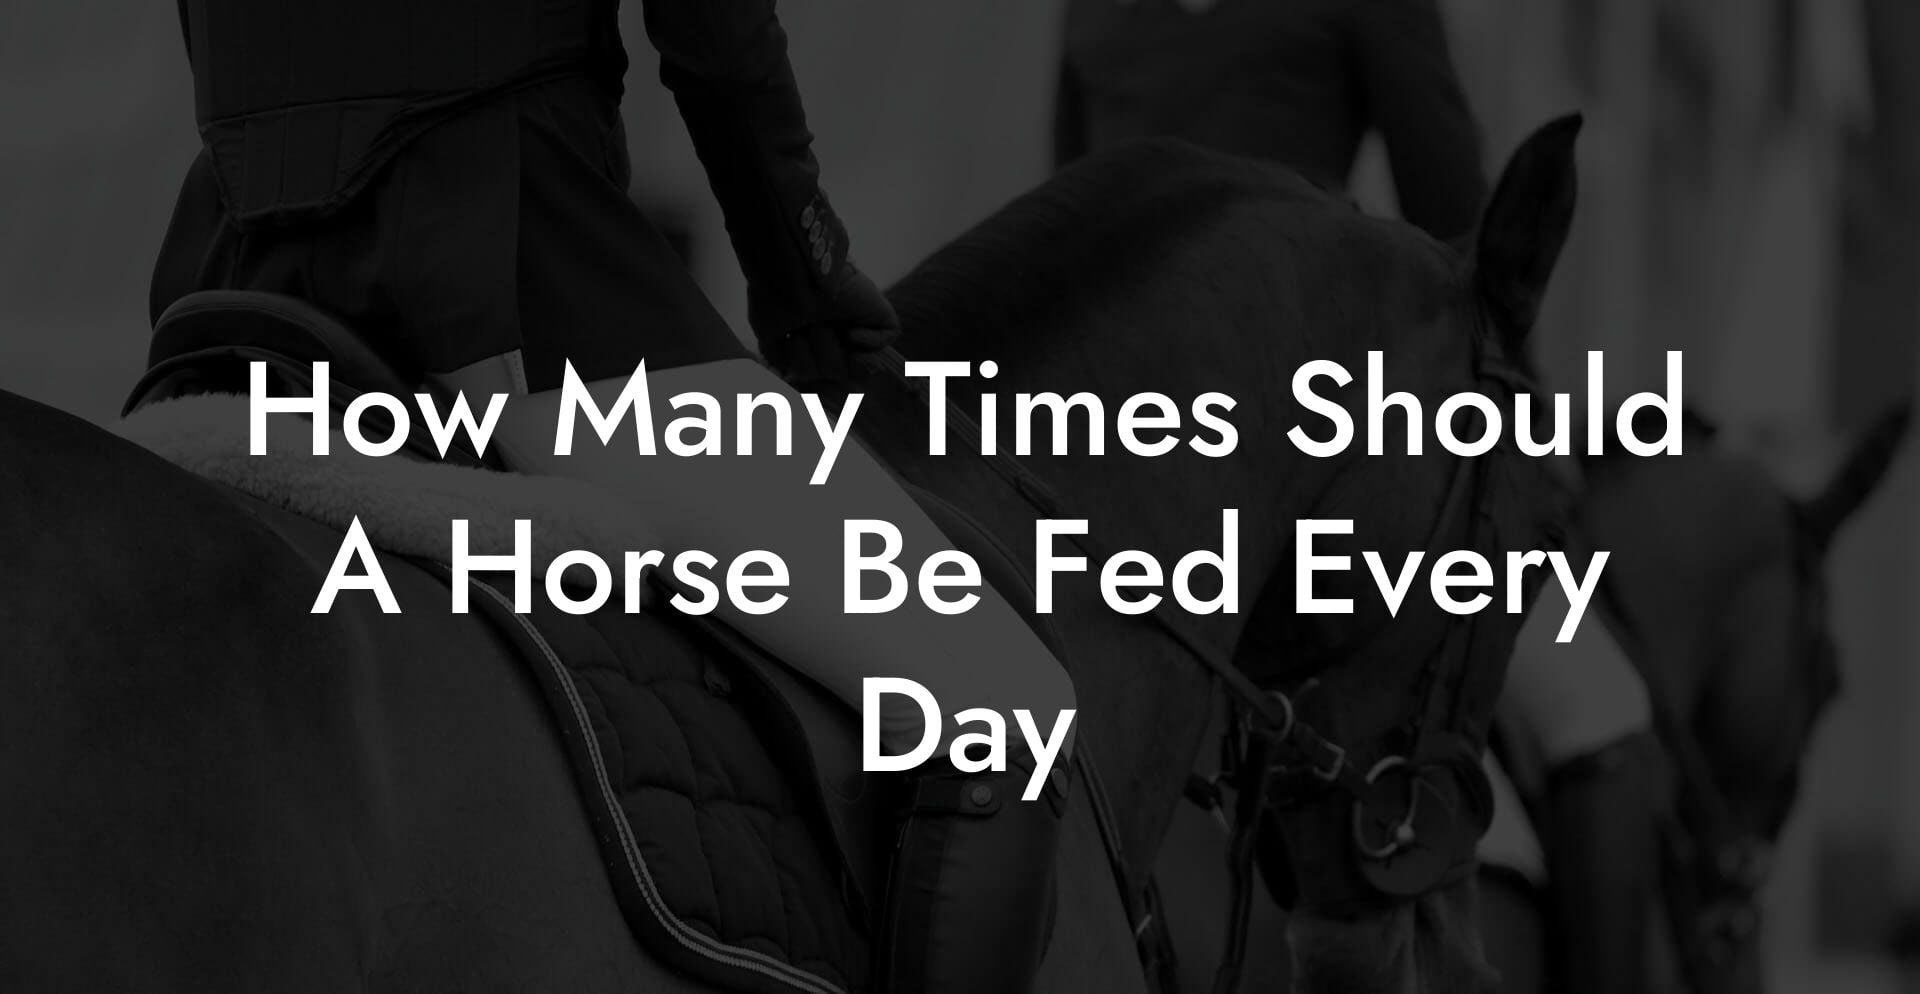 How Many Times Should A Horse Be Fed Every Day